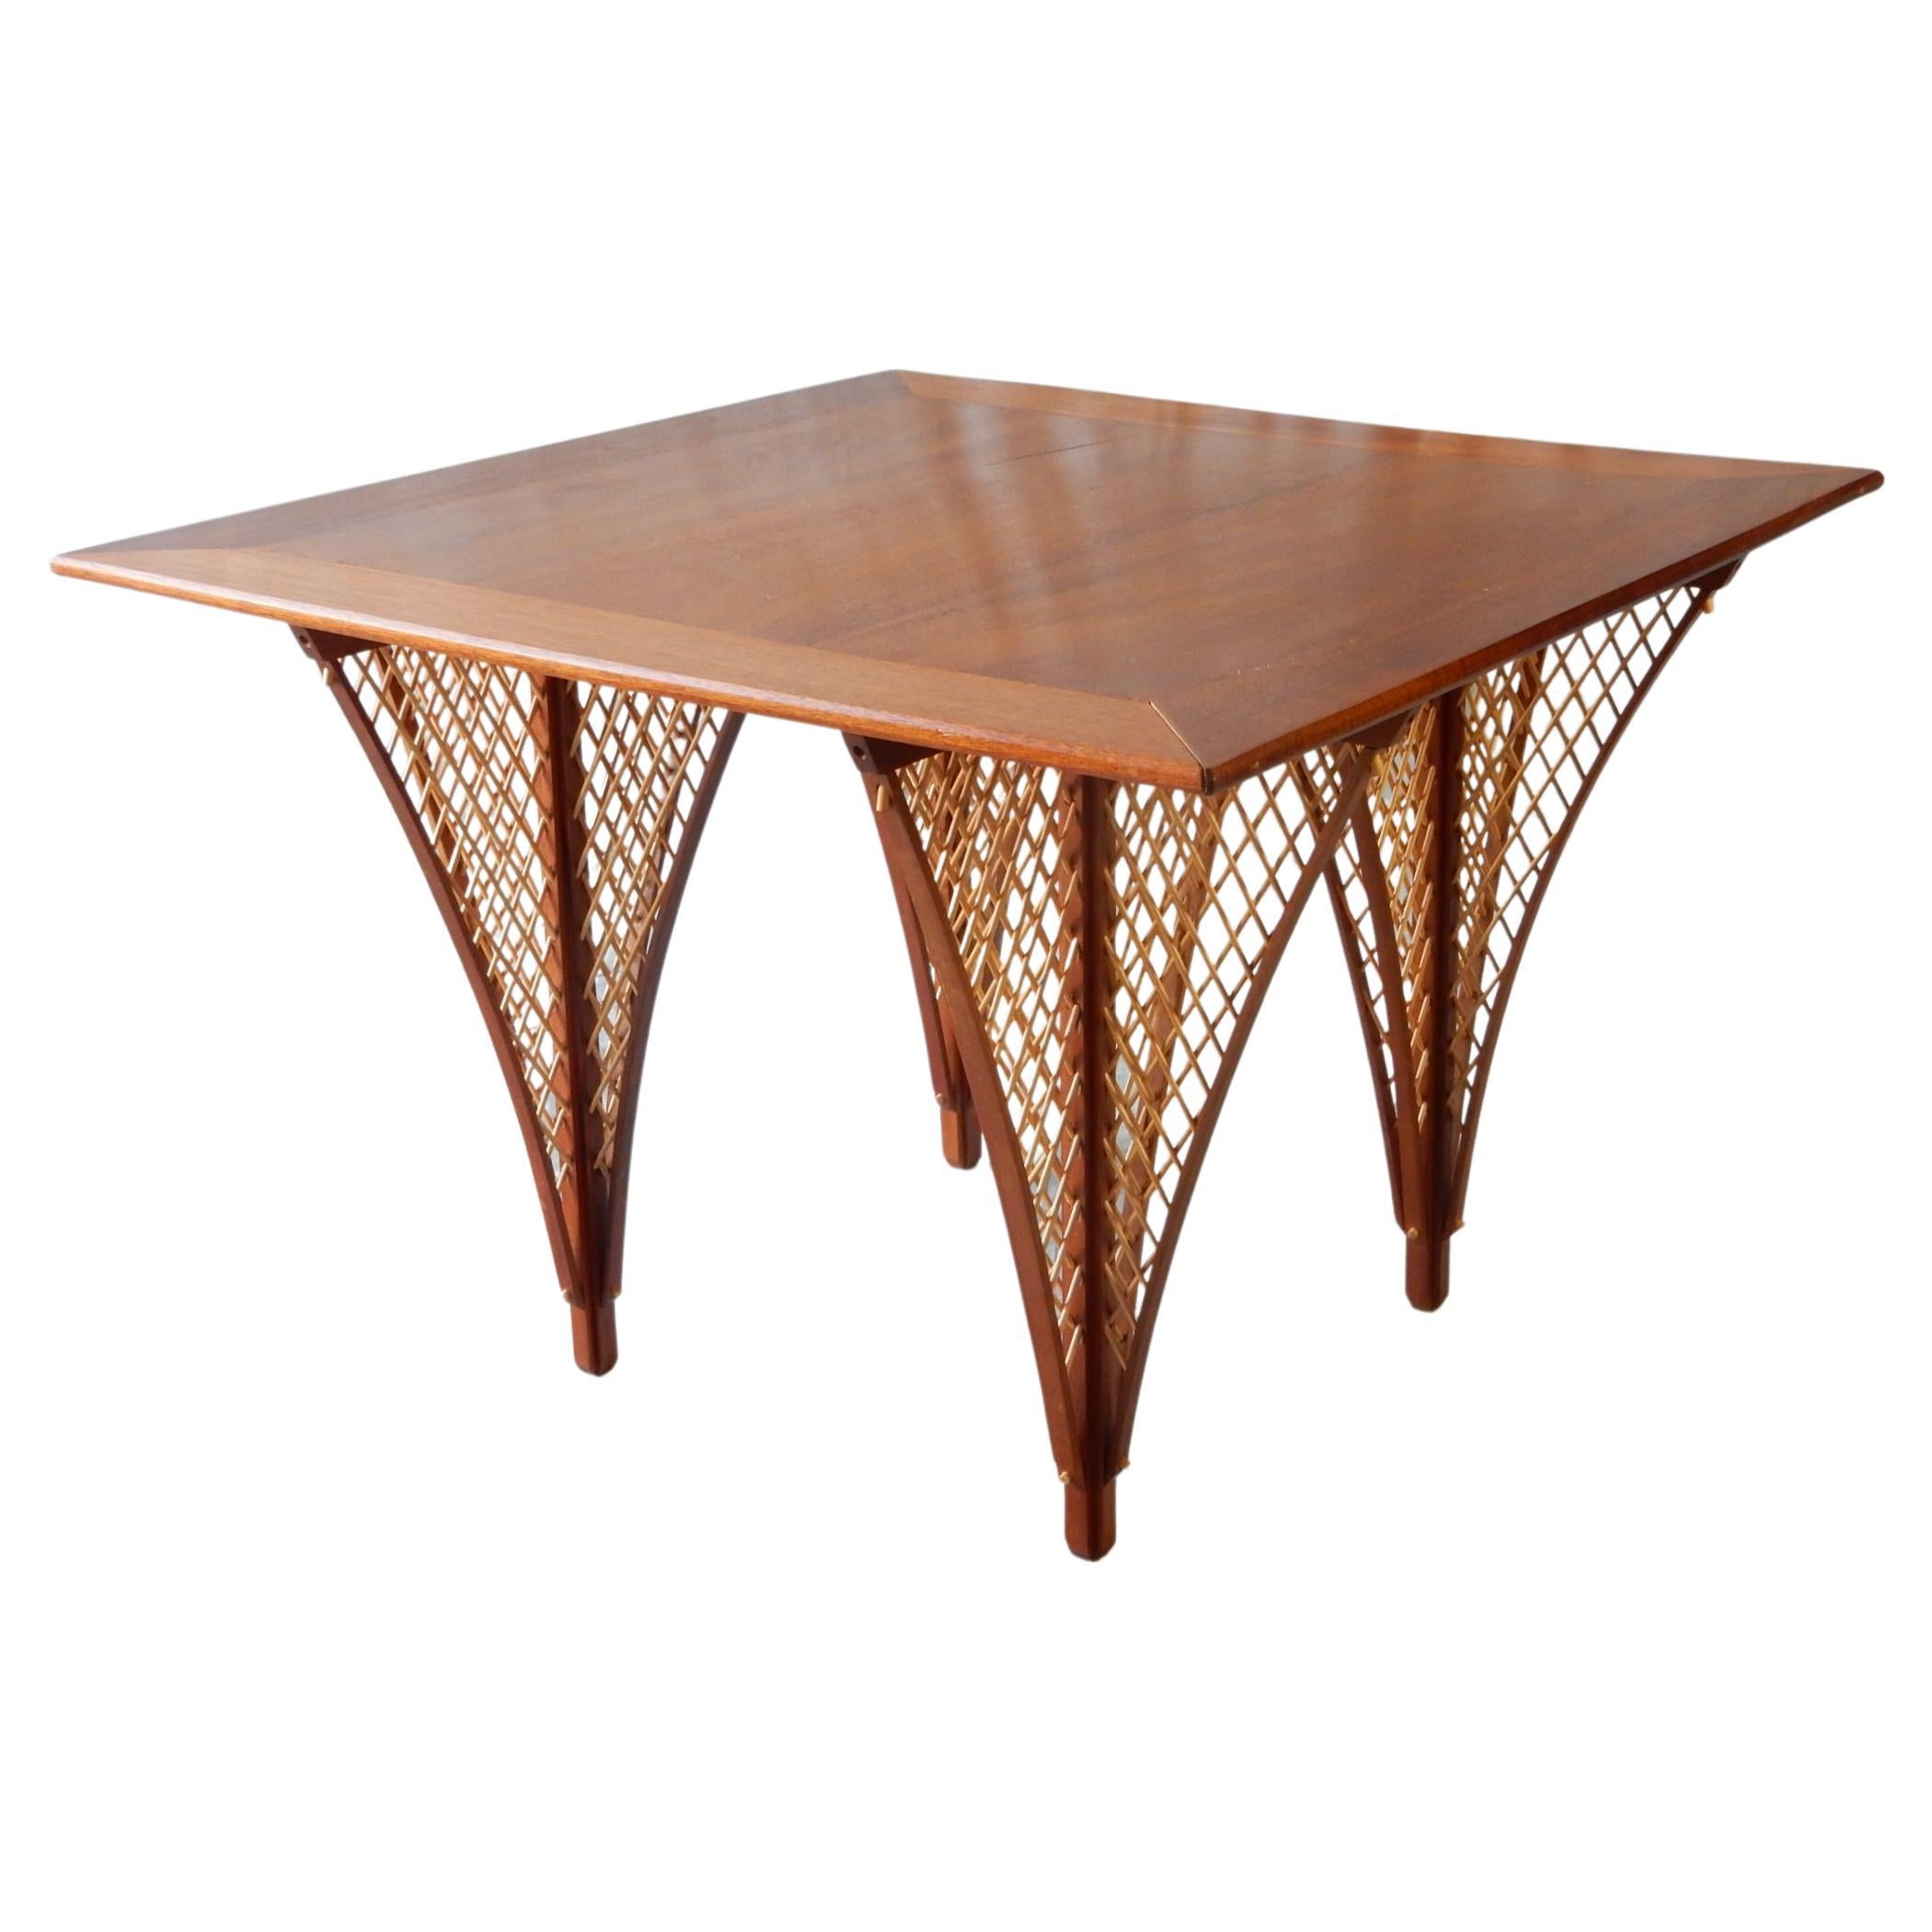 One of a kind and gorgeous architectural lattice Birch leg and Teak card table.
Circa 1960-70's. Solid, well crafted piece of functional art. Not signed or marked by designer.
Aged patina and dryness crack of table top (pictured). We left as is to